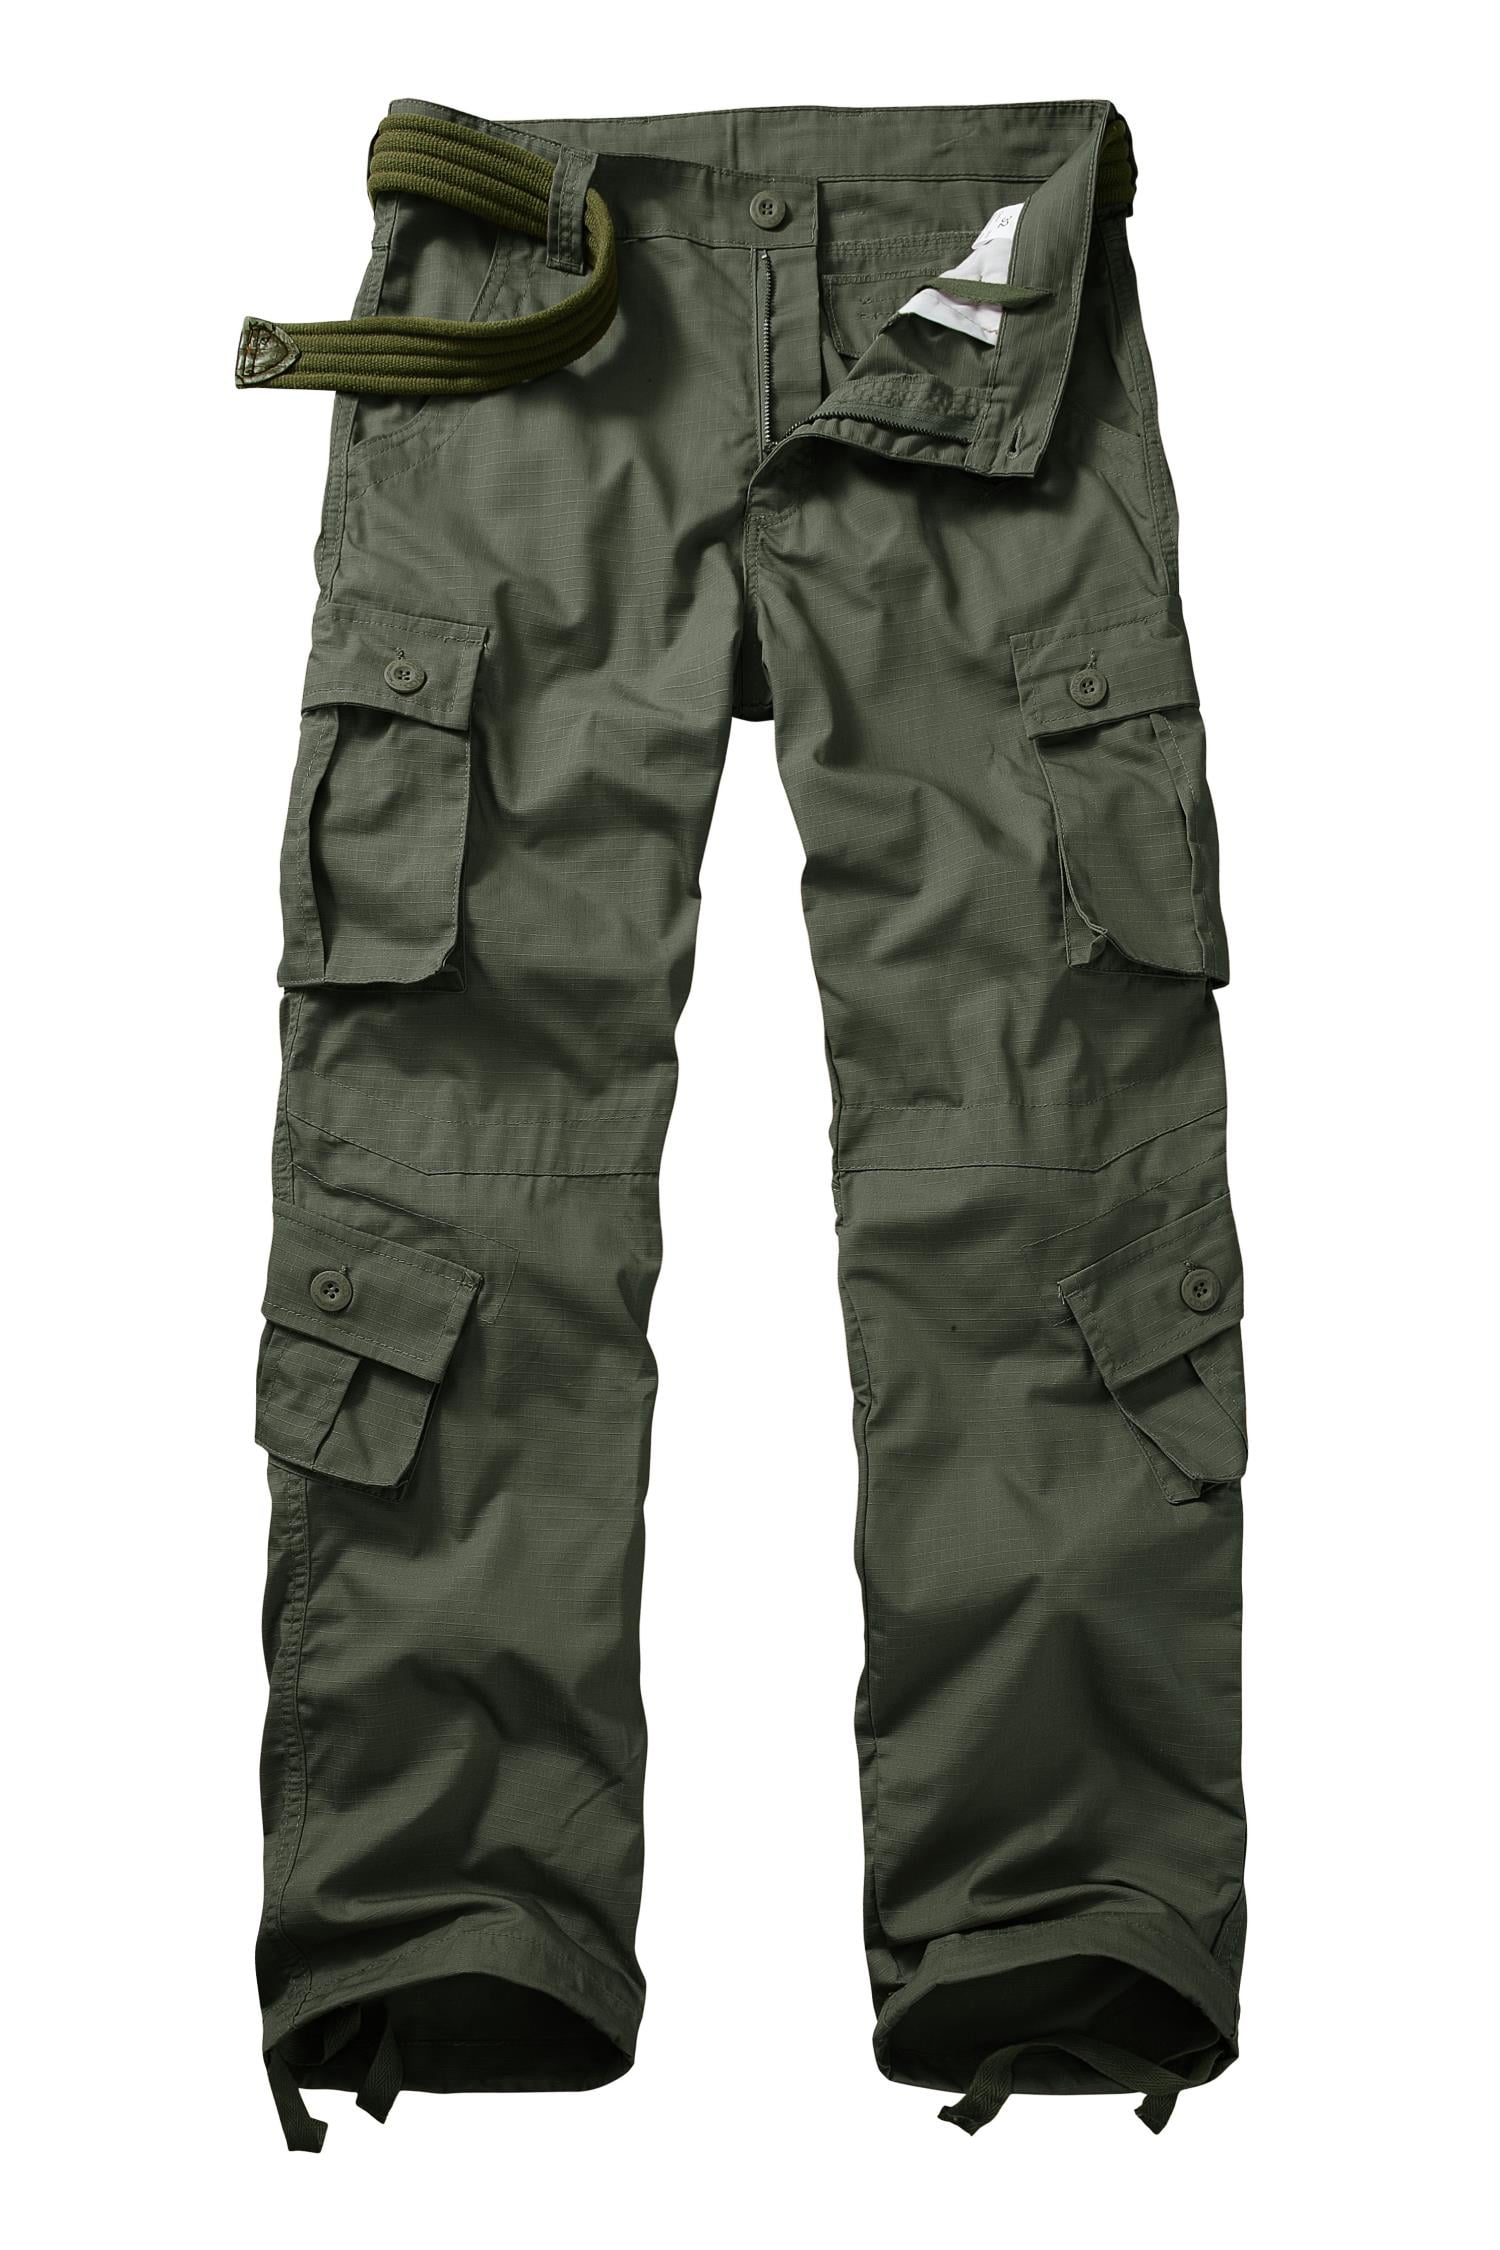 TRGPSG Men's Casual Work Cargo Pants Outdoor Hiking Pants with Pockets ...